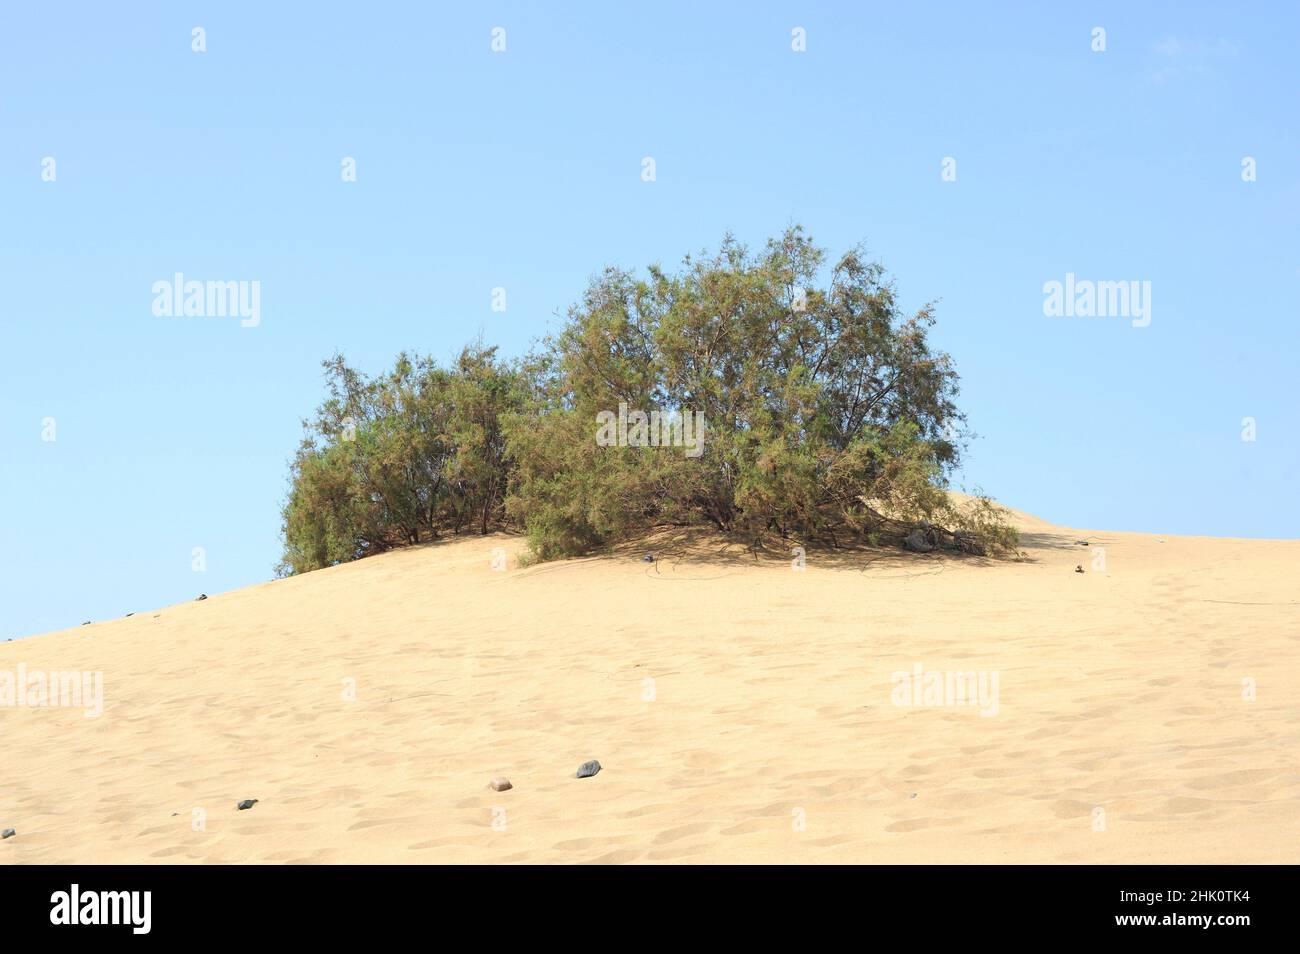 Tarajal (Tamarix canariensis) is a shrub or small tree netive to western Mediterranean basin and Canary Islands. This photo was taken in Maspalomas, Stock Photo